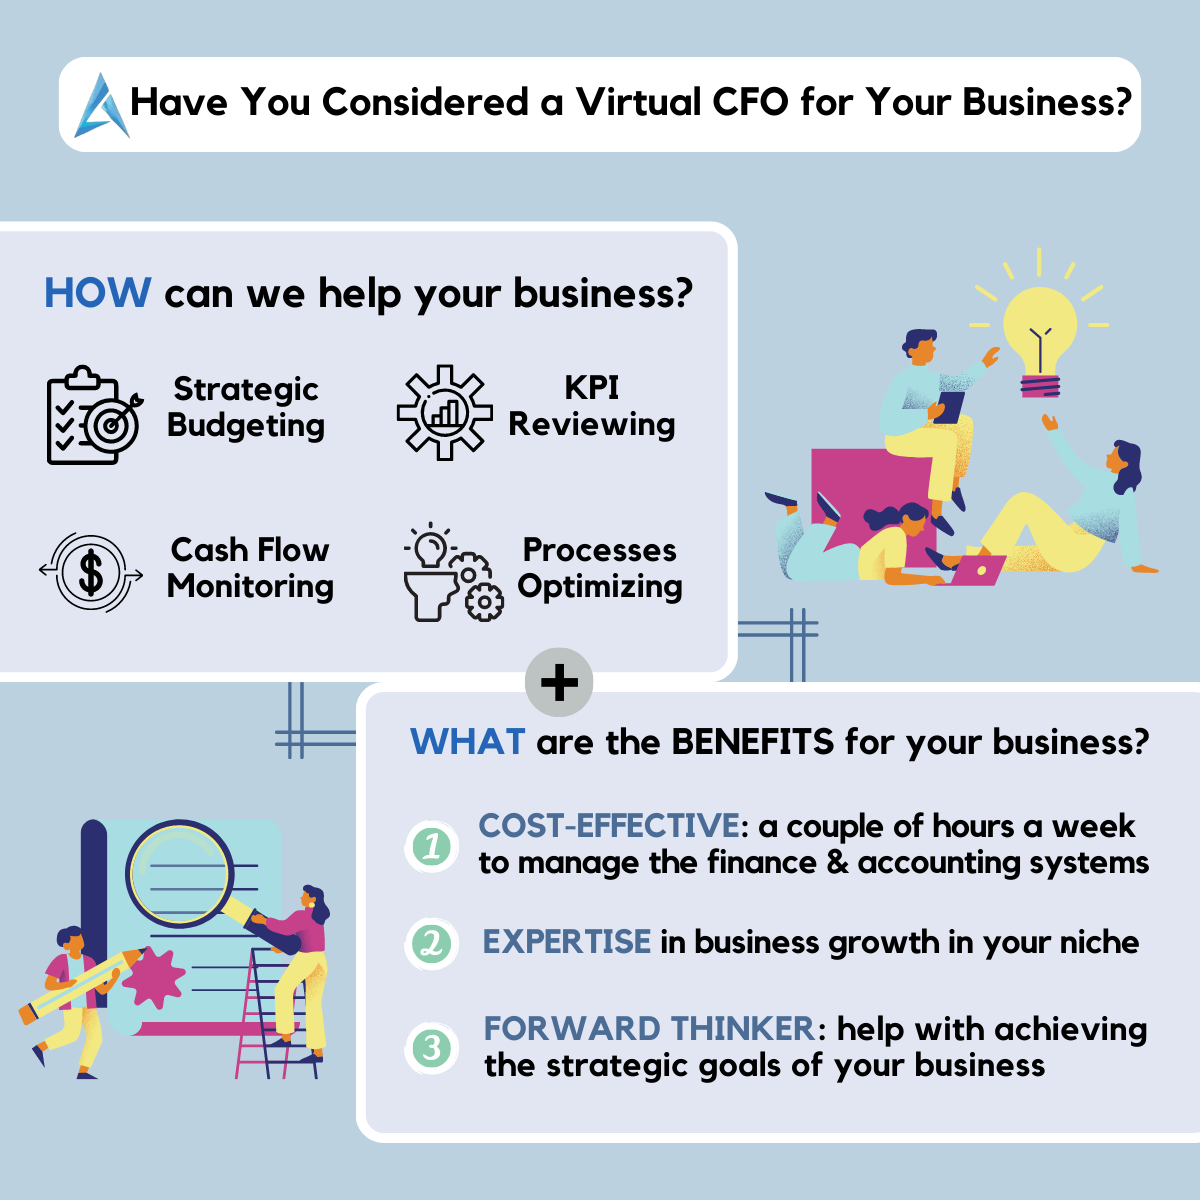 Have you considered a Virtual CFO for your Business?